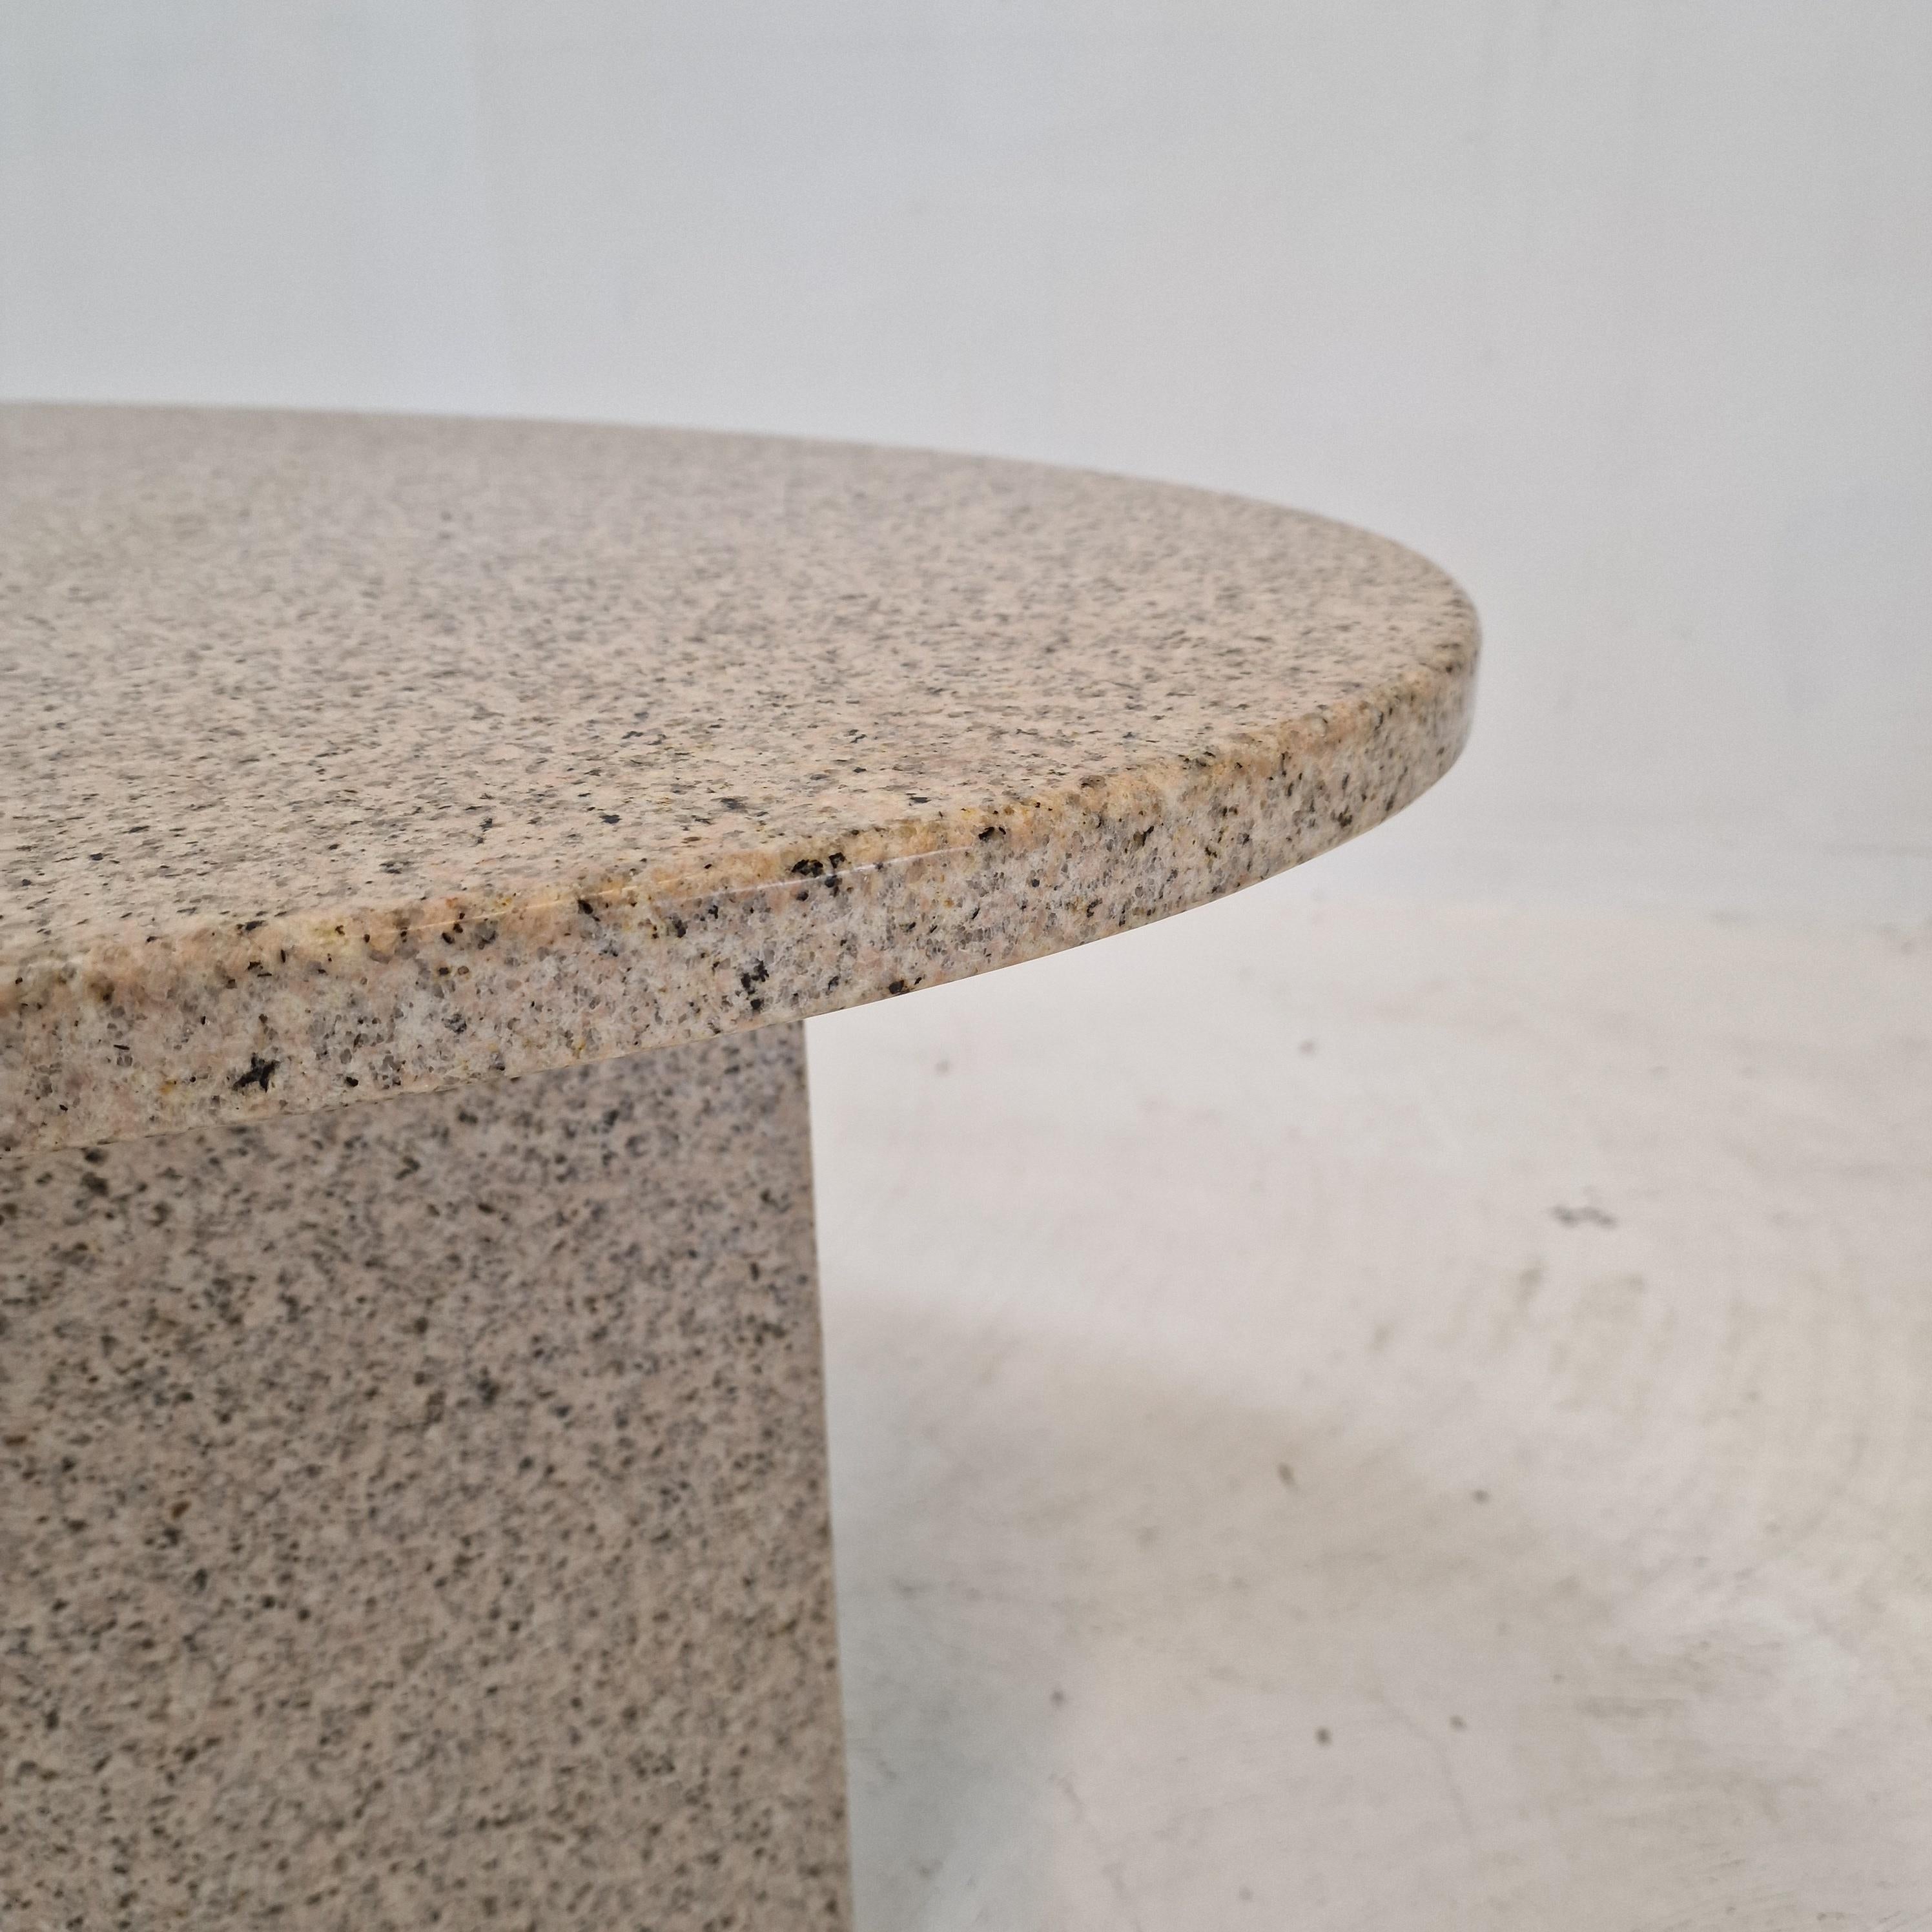 Italian Coffee or Side Table in Granite, 1980s For Sale 6